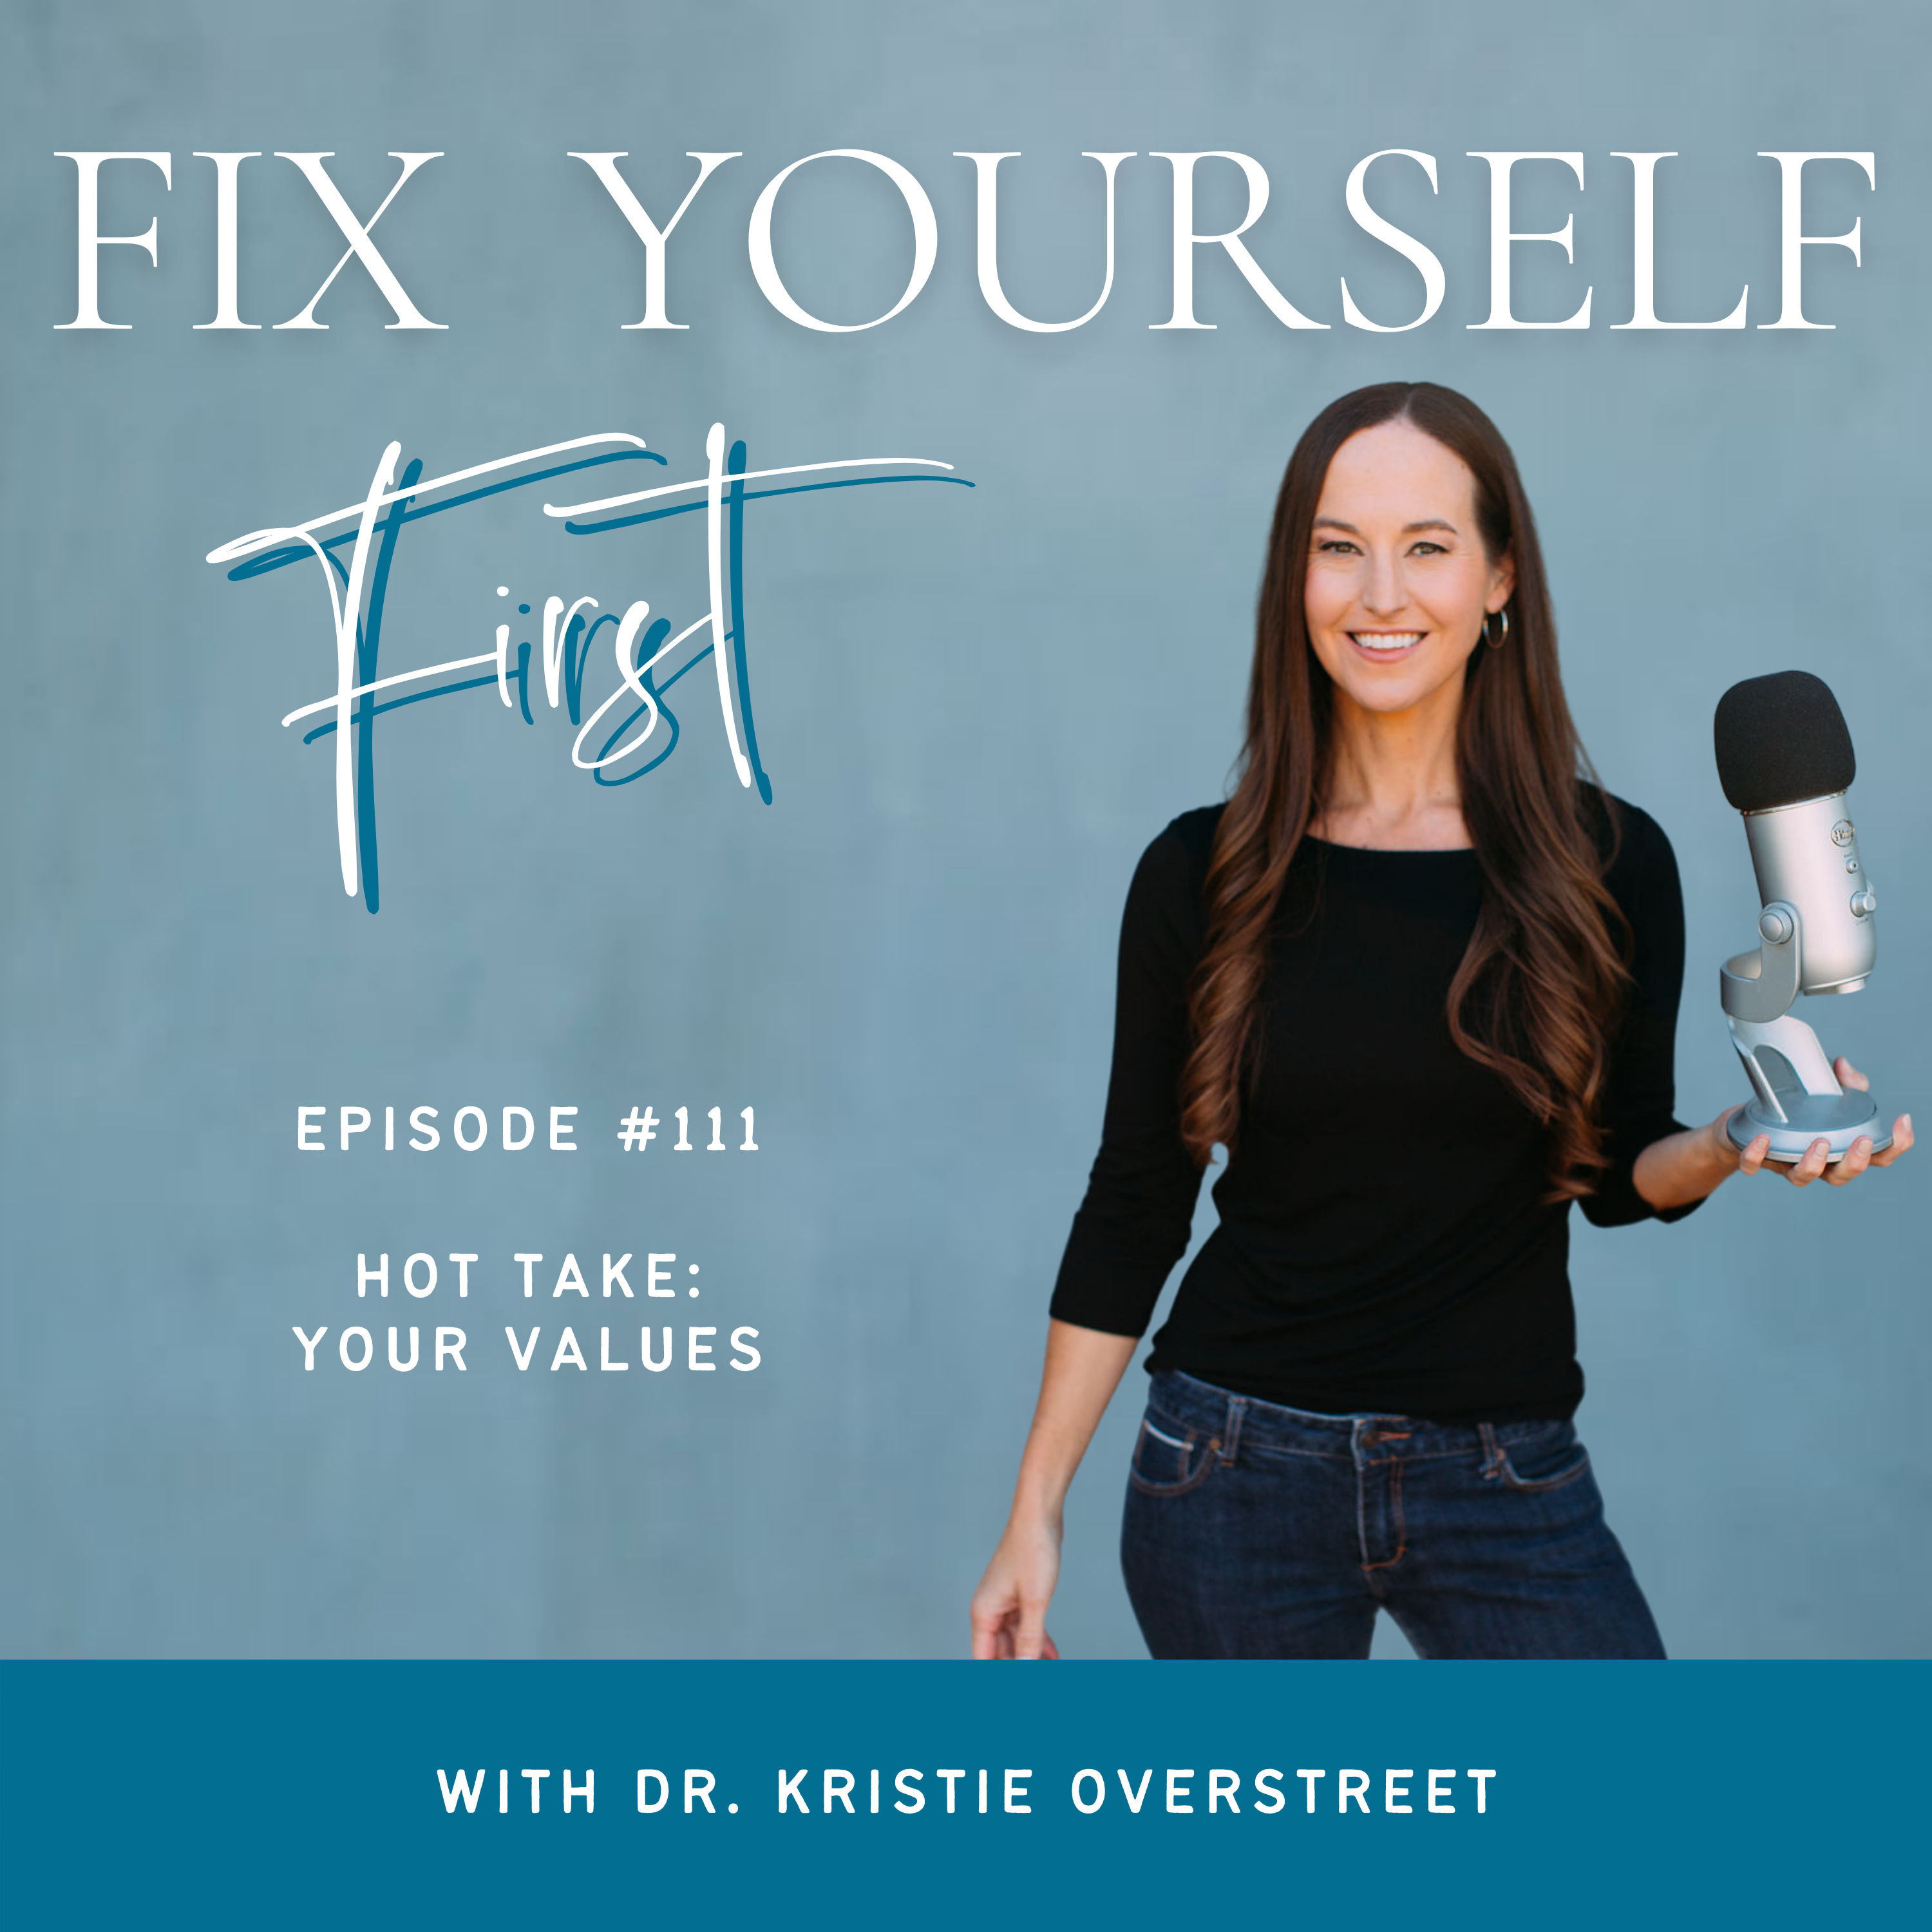 Fix Yourself First Episode 111 Hot Take: Your Values